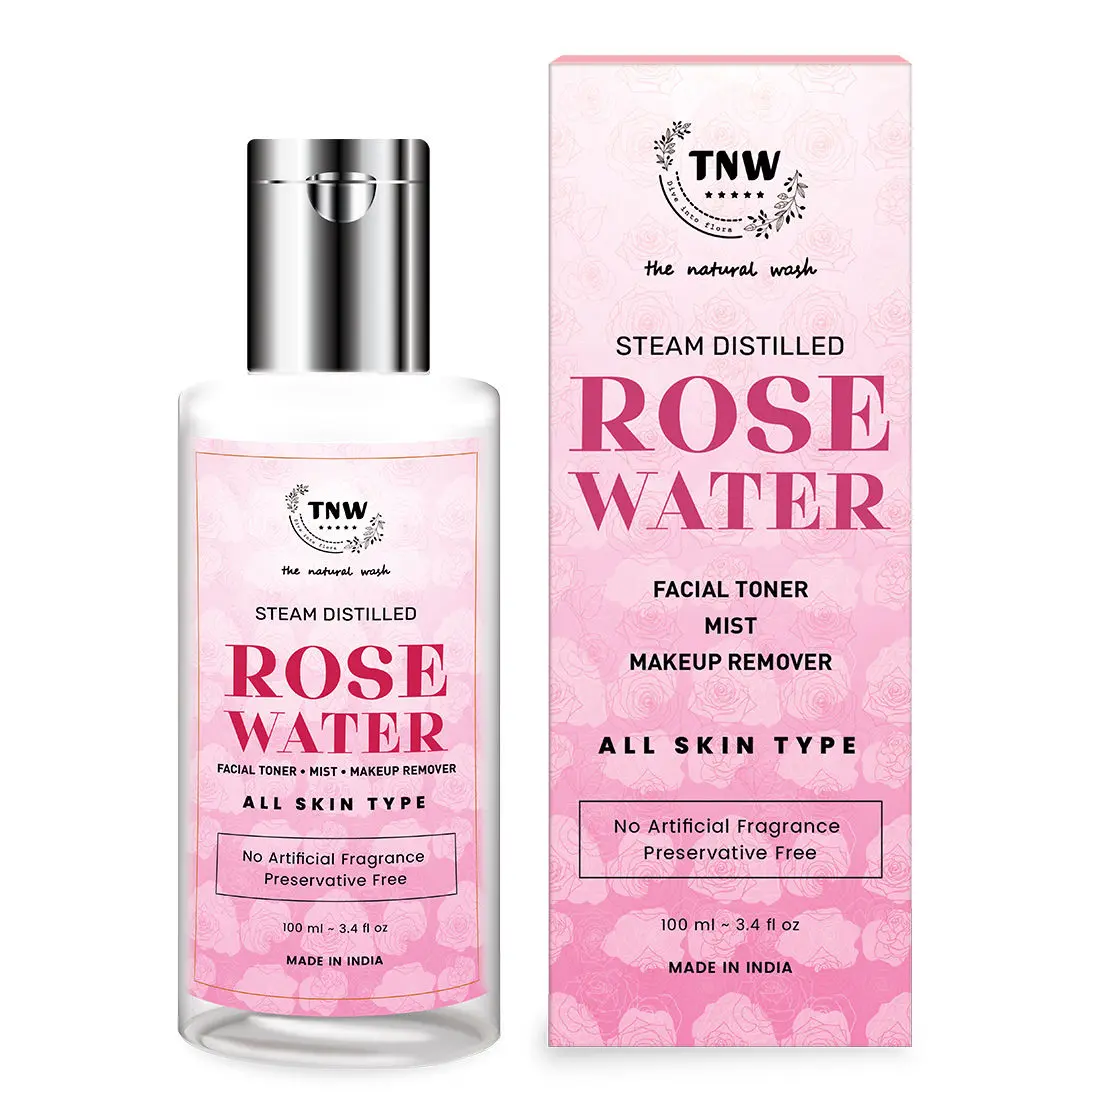 TNW - The Natural Wash Steam Distilled Rose Water- Facial Toner Mist and Makeup Remover (100 ml)